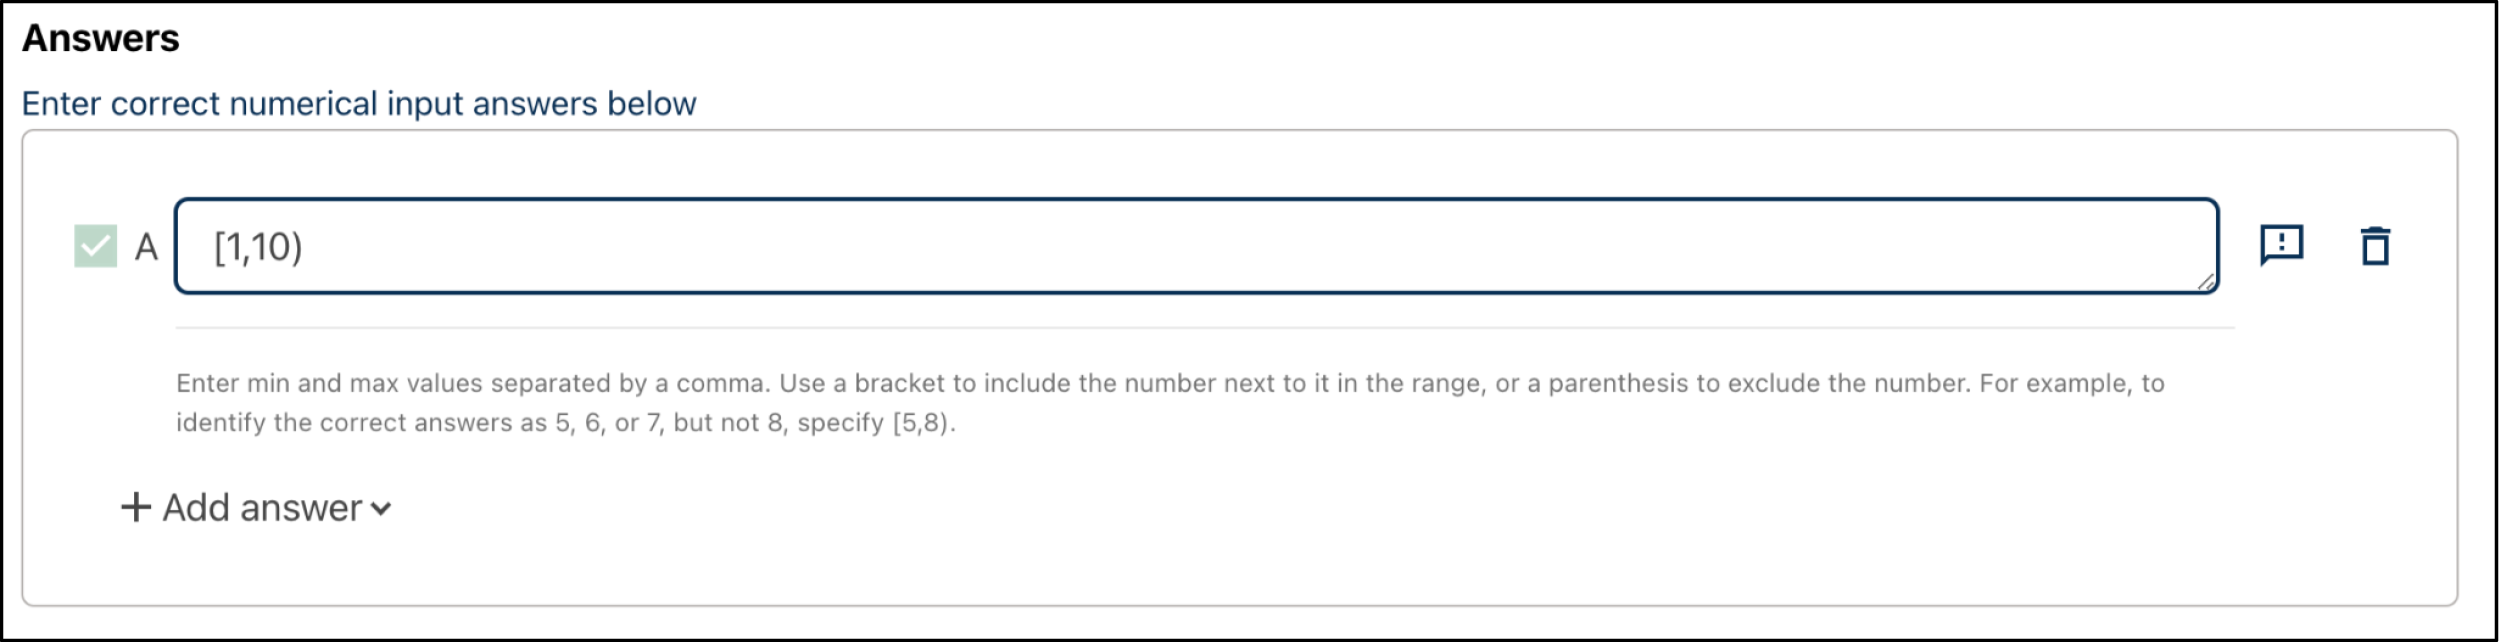 An example answer range set from 1 to 10. This includes 1 but not 10.